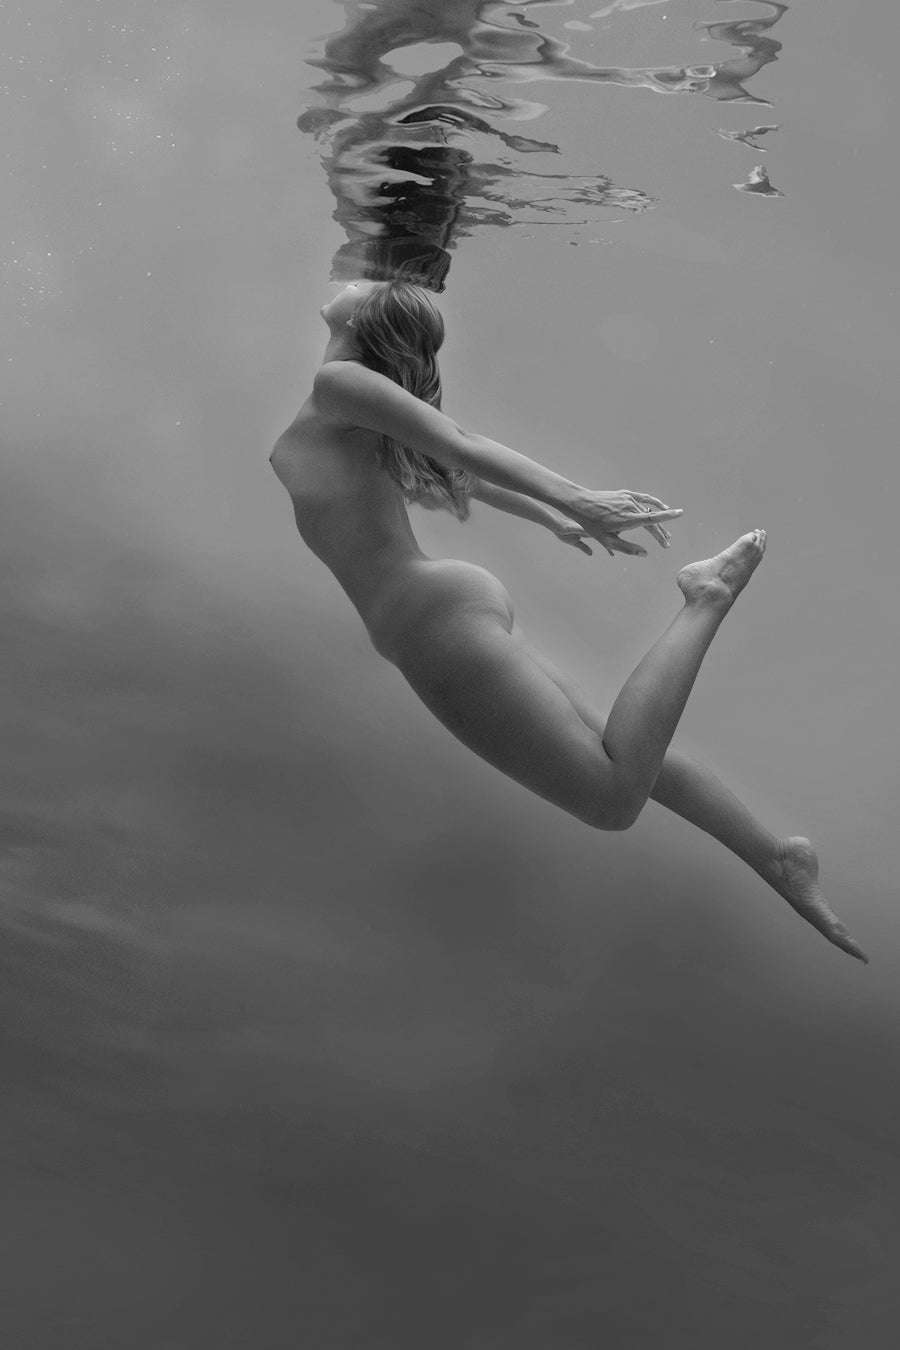 "Within the depths of the sea, a stunning figure, embodying the essence of a Naiad, floats gracefully amidst the aquatic realm. Her ethereal beauty and serene presence are accentuated by the play of light and shadow in the fine art photogray. The mysterious allure of the underwater world surrounds her, evoking a sense of enchantment and tranquility.